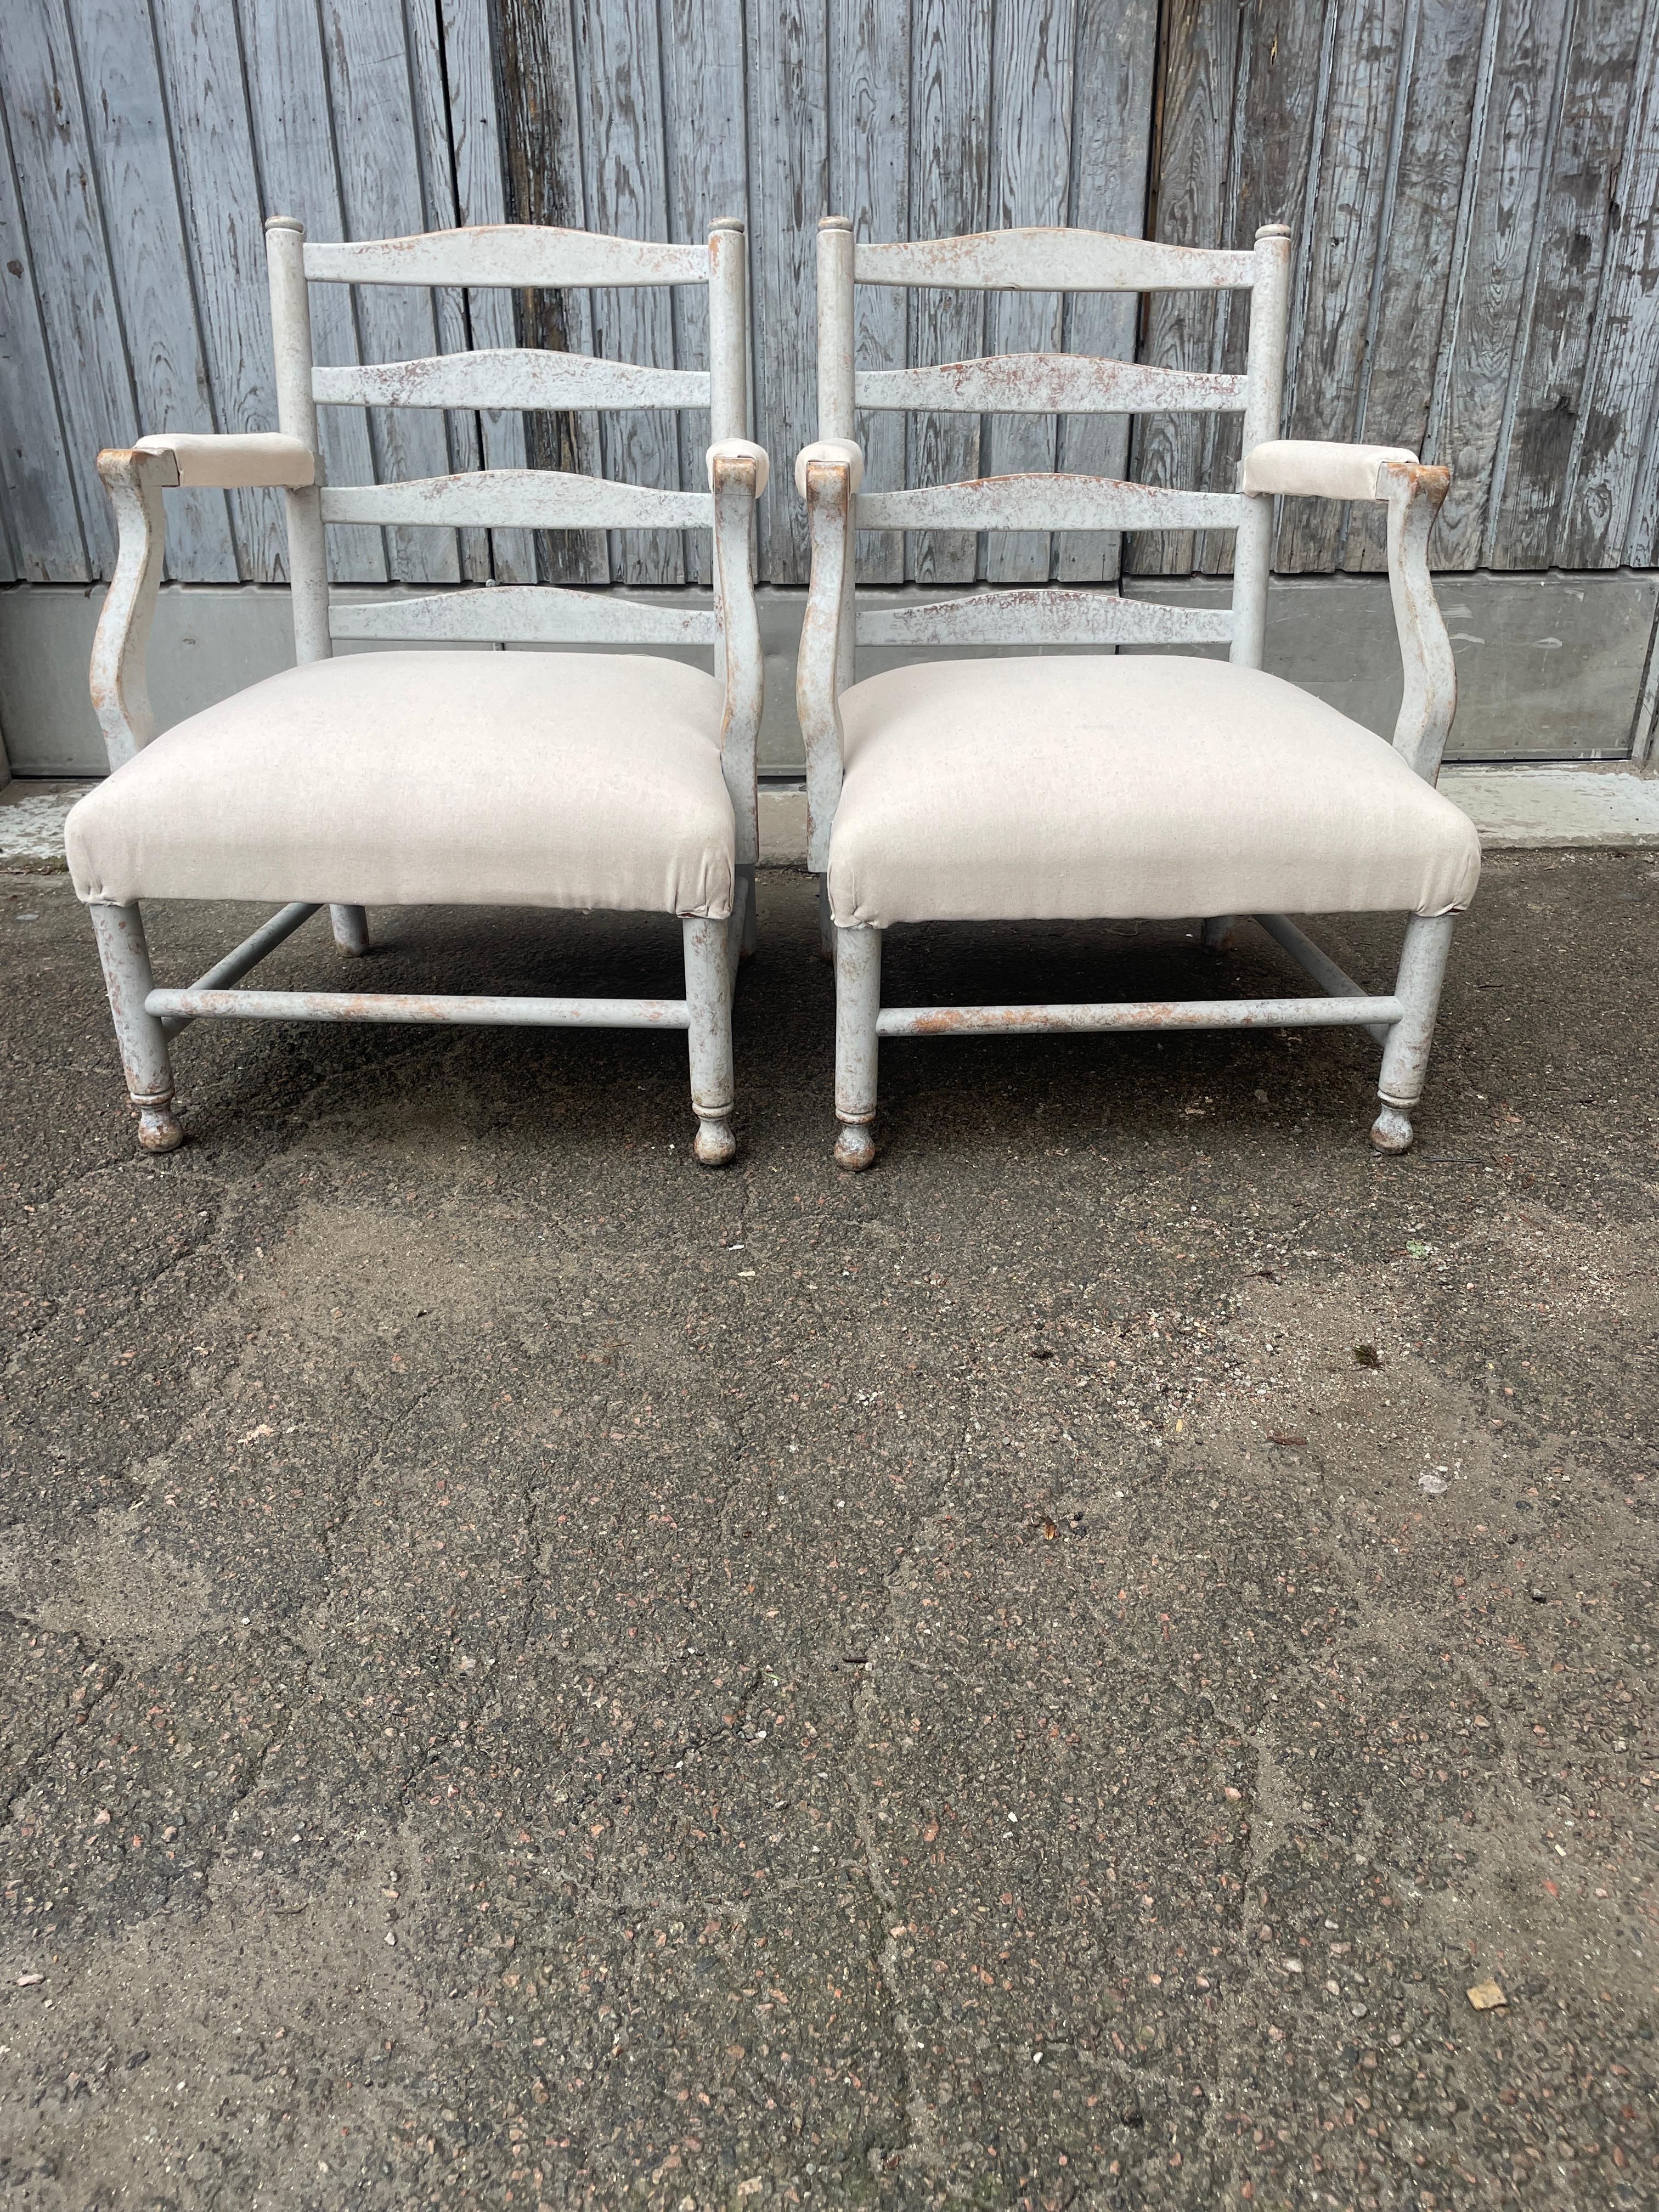 Pair of Late 19th Century Swedish Gripsholm Armchairs In Good Condition For Sale In Haddonfield, NJ